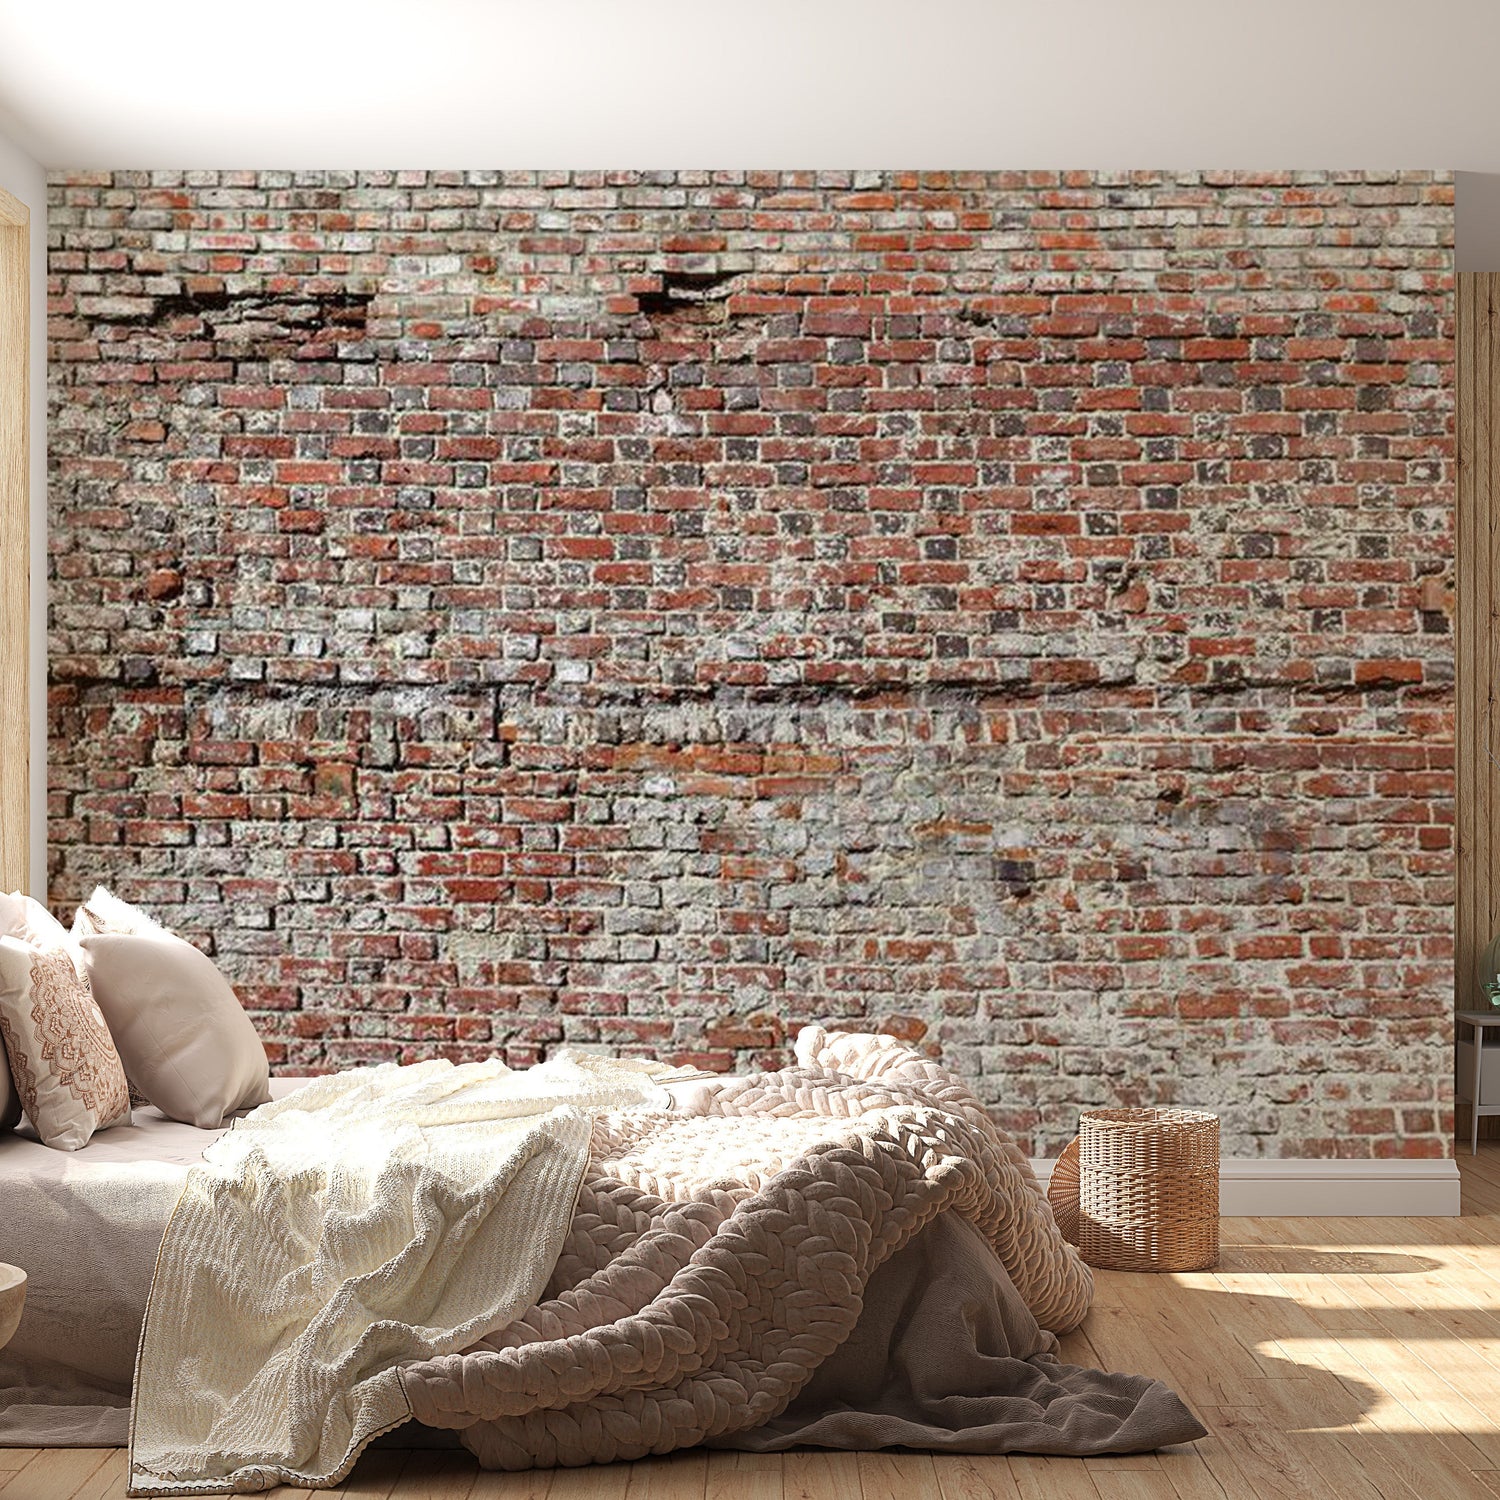 Peel & Stick XXL Wall Mural - Old Red Brick Wall - Removable Wall Decals